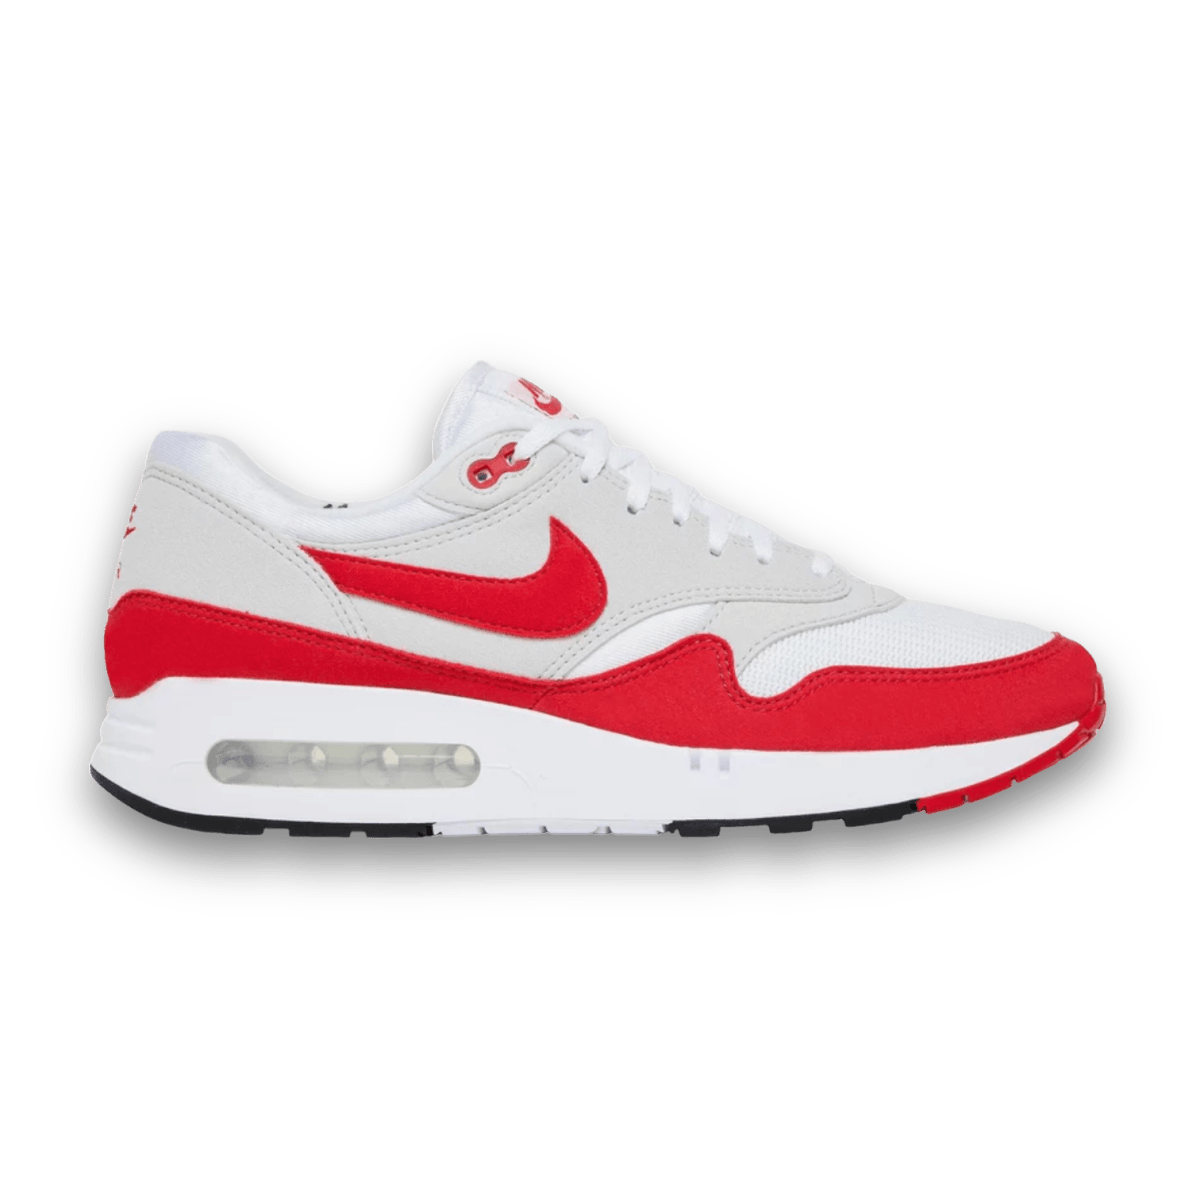 Air Max 1 '86 OG 'Big Bubble - Red' - Low Sneaker - Jawns on Fire Sneakers & Streetwear